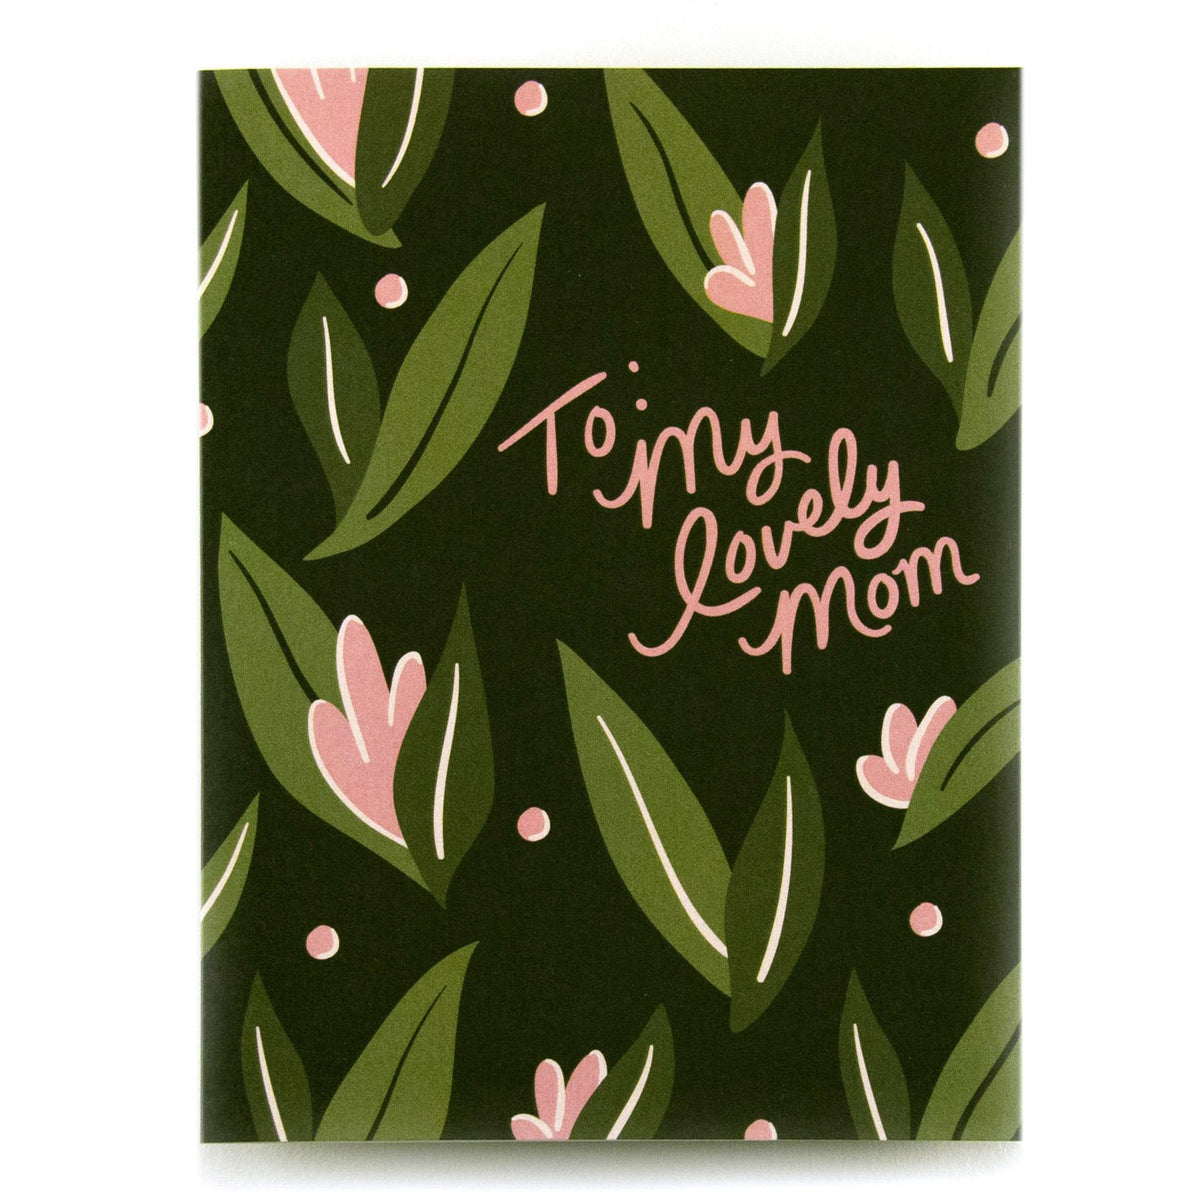 Greeting Card. Green and Pink Retro leaf design with pink handwritten text that says "To: My Lovely Mom"